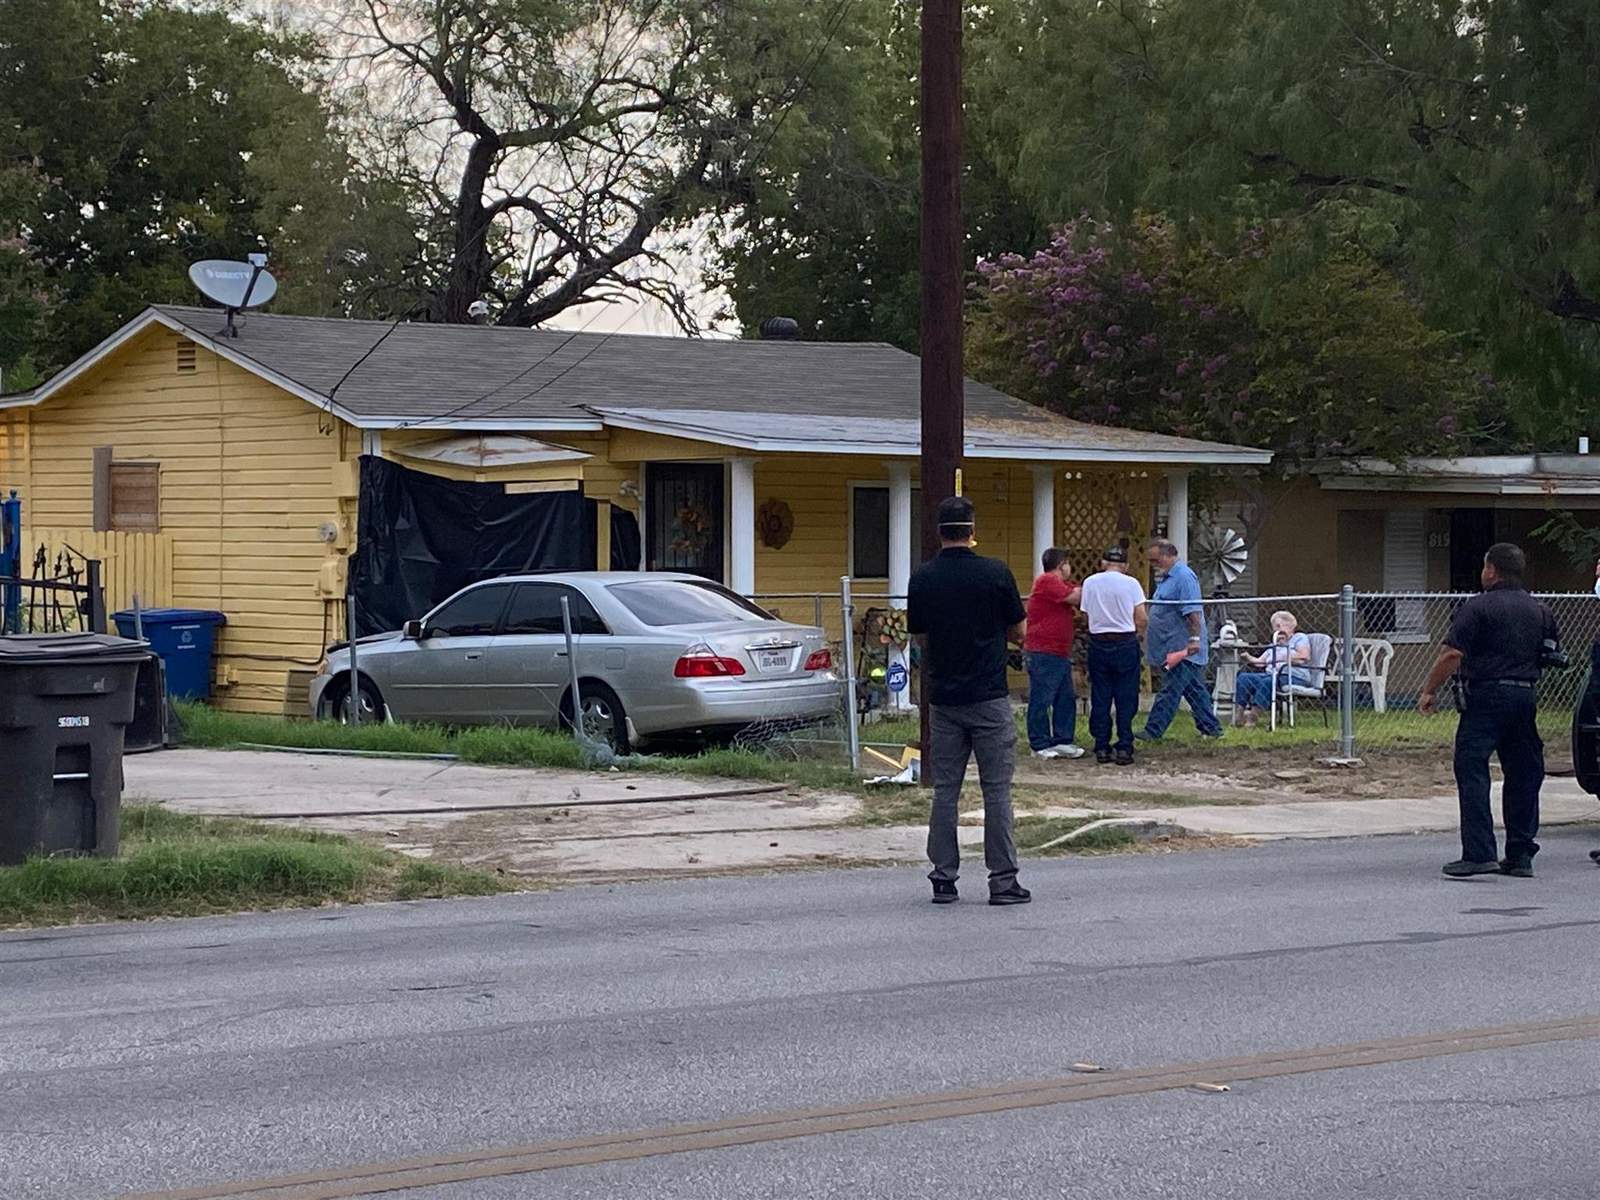 Man swerves vehicle into 90-year-old woman’s house on South Side, SAPD says